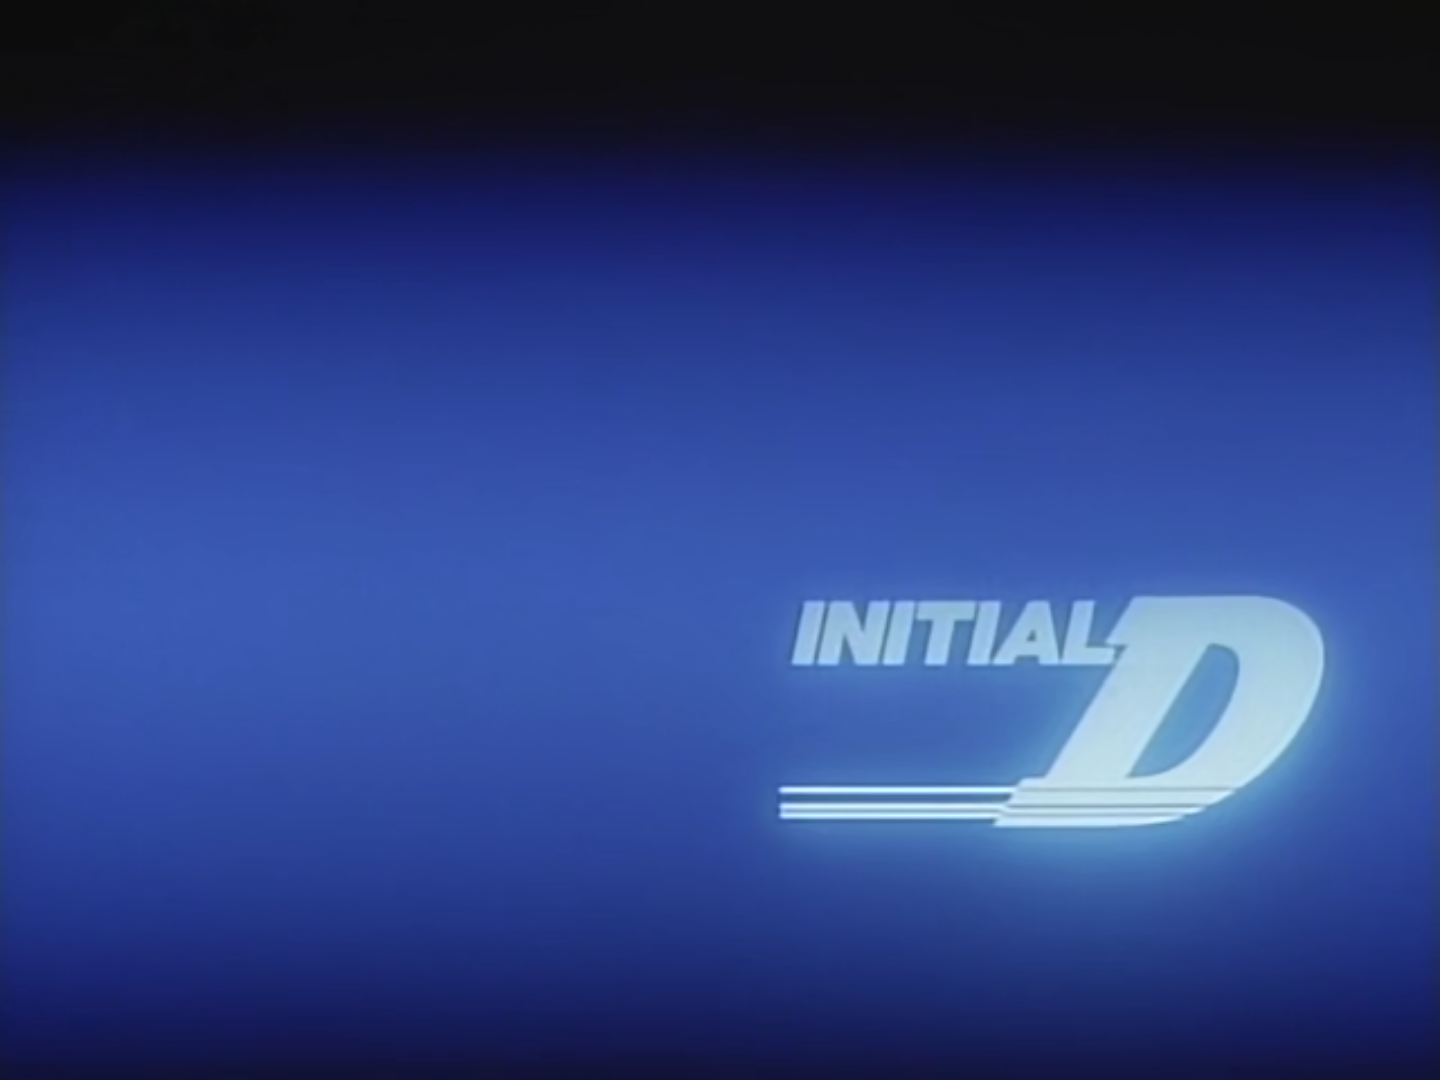 Initial D Anime Stage 1 - 6 + Battle & Extra Stages & 3 Movies DVD English  Subs